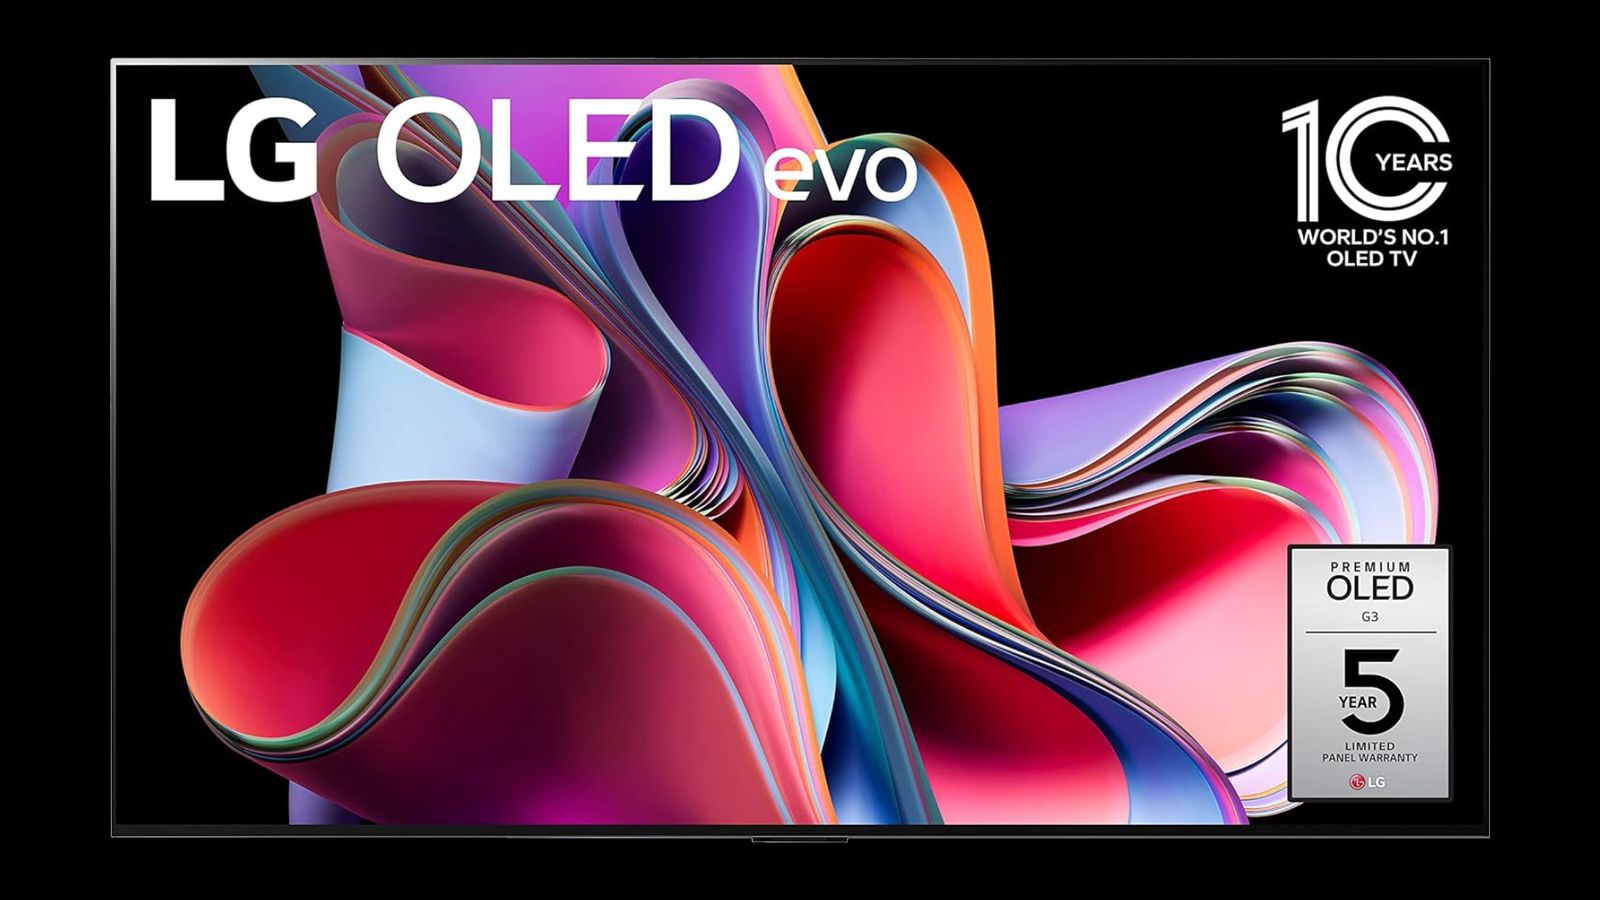 LG OLED evo G3 product image of a black near-frameless TV with a red, blue, purple, and orange wavy pattern on the display.